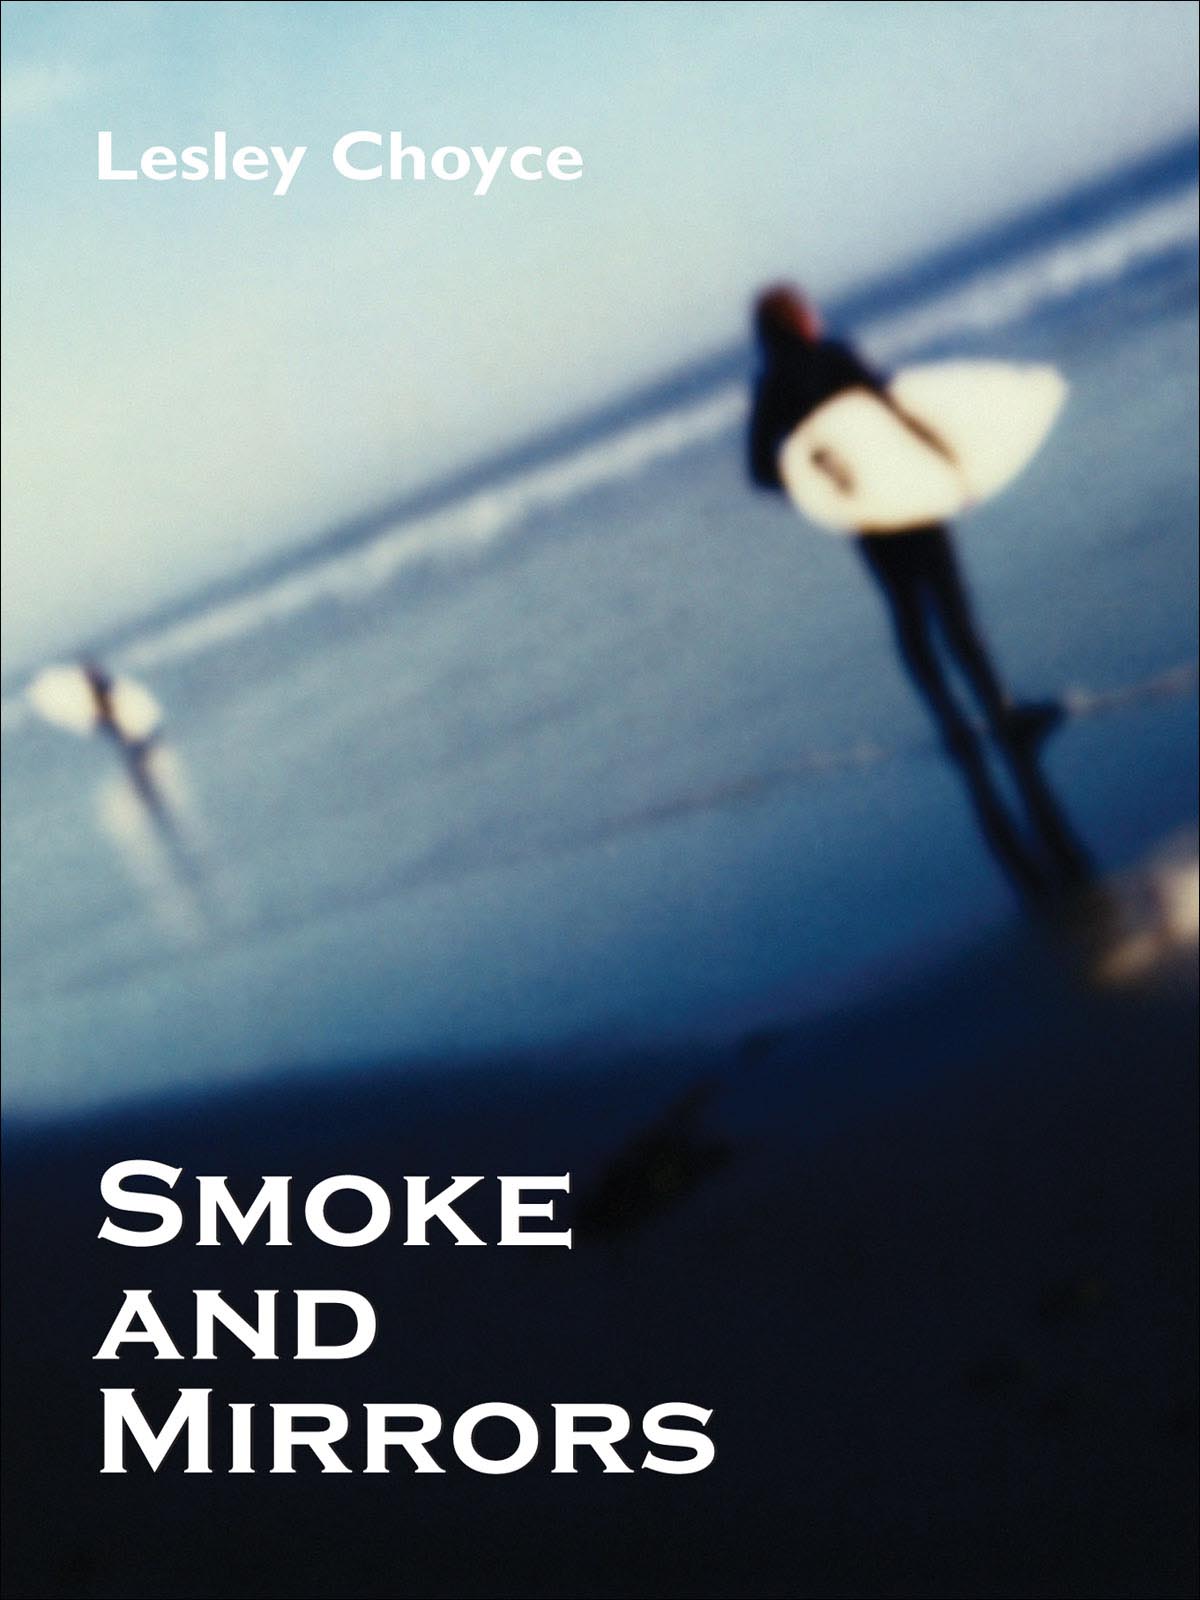 Smoke and Mirrors (2004) by Lesley Choyce